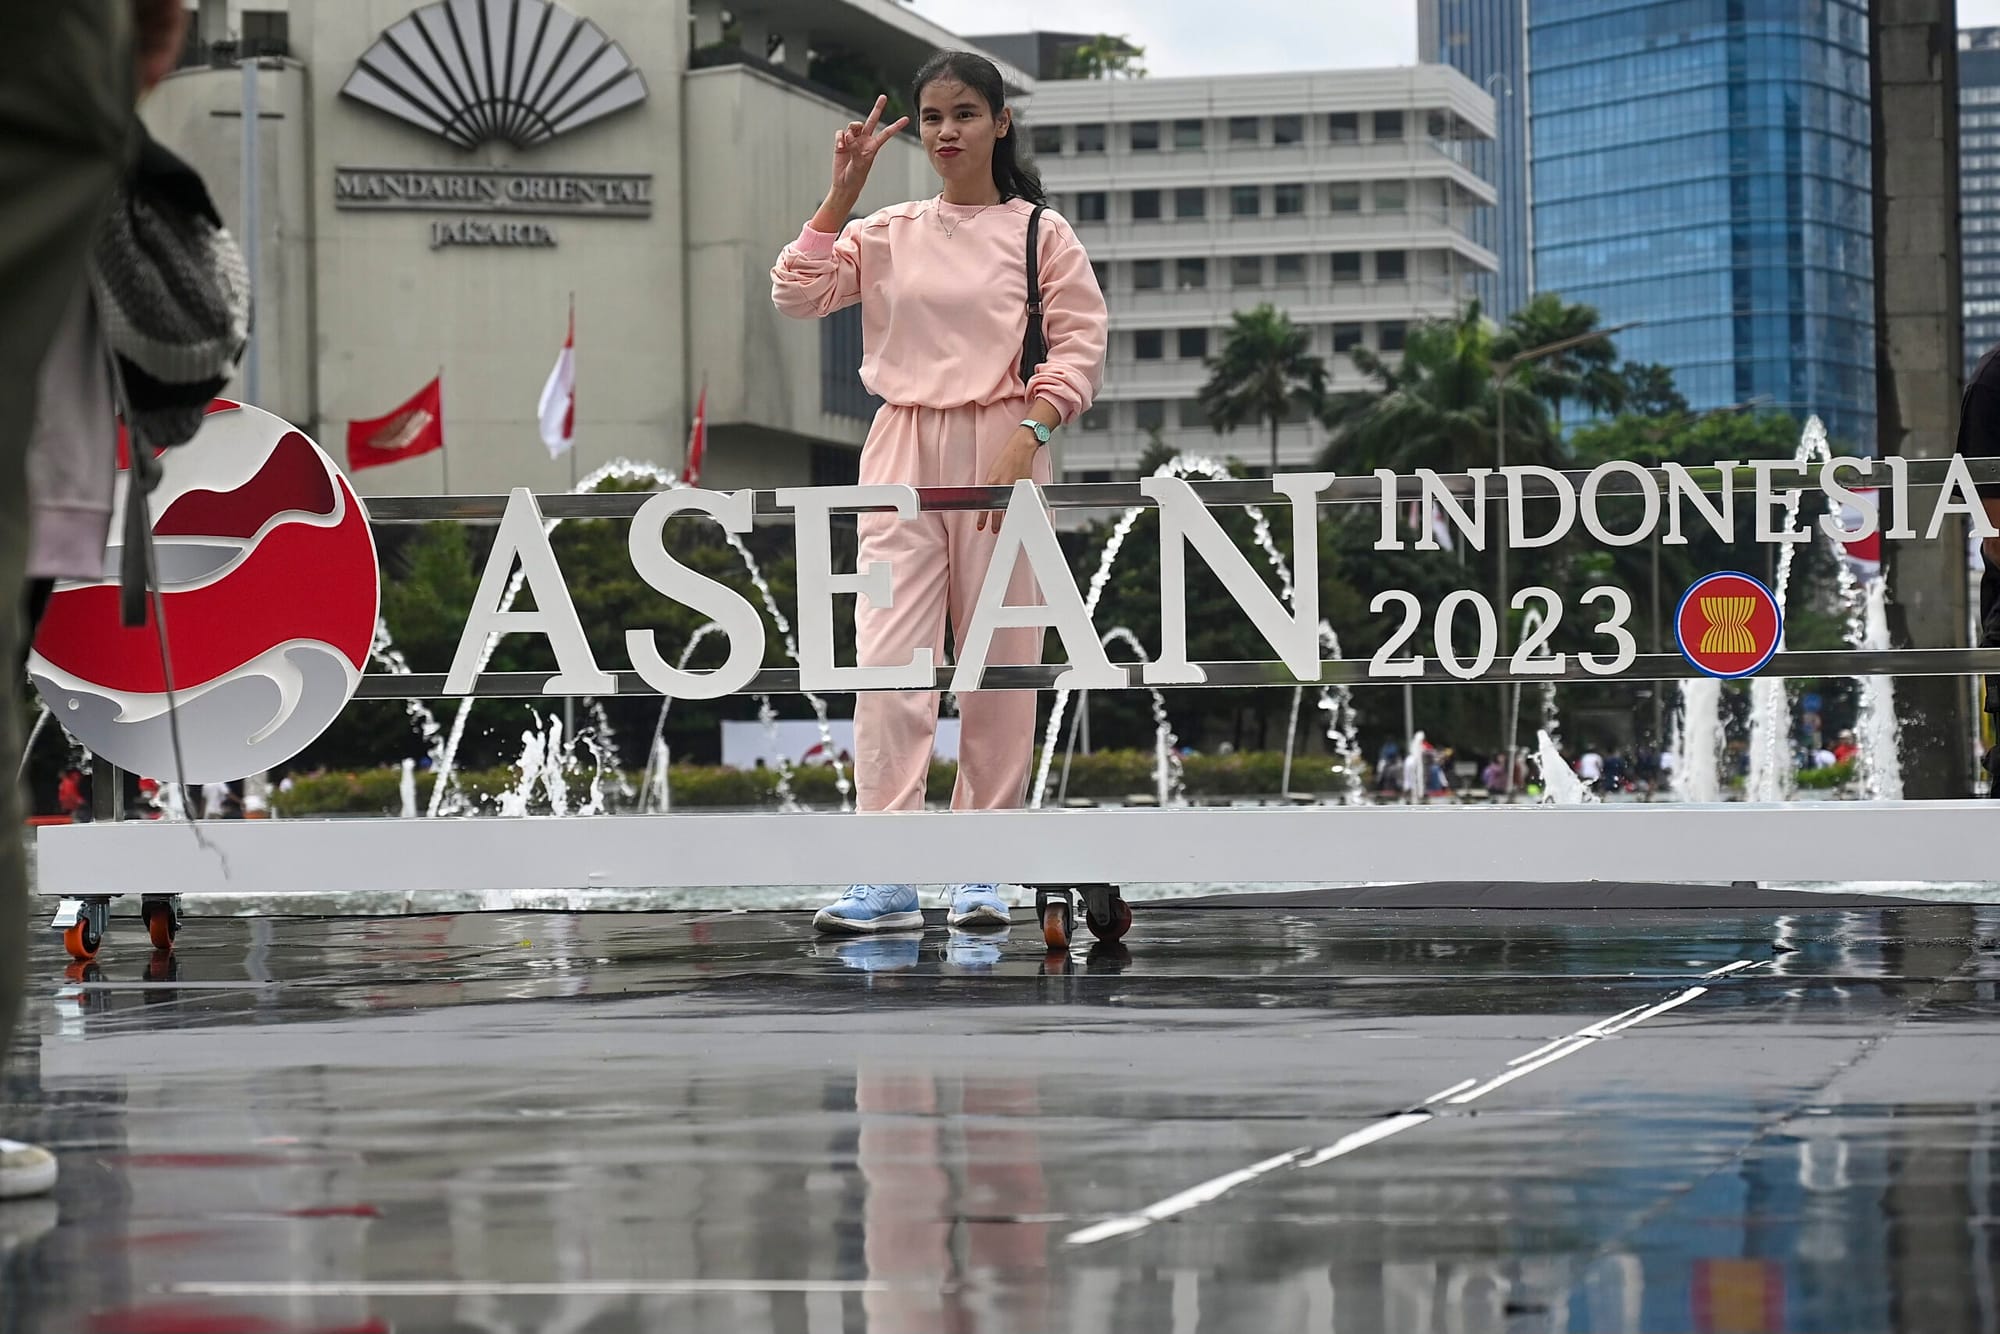 One of the many ASEAN signs in Jakarta in 2023. Source: Globe: Lines of Thought Across Southeast Asia.